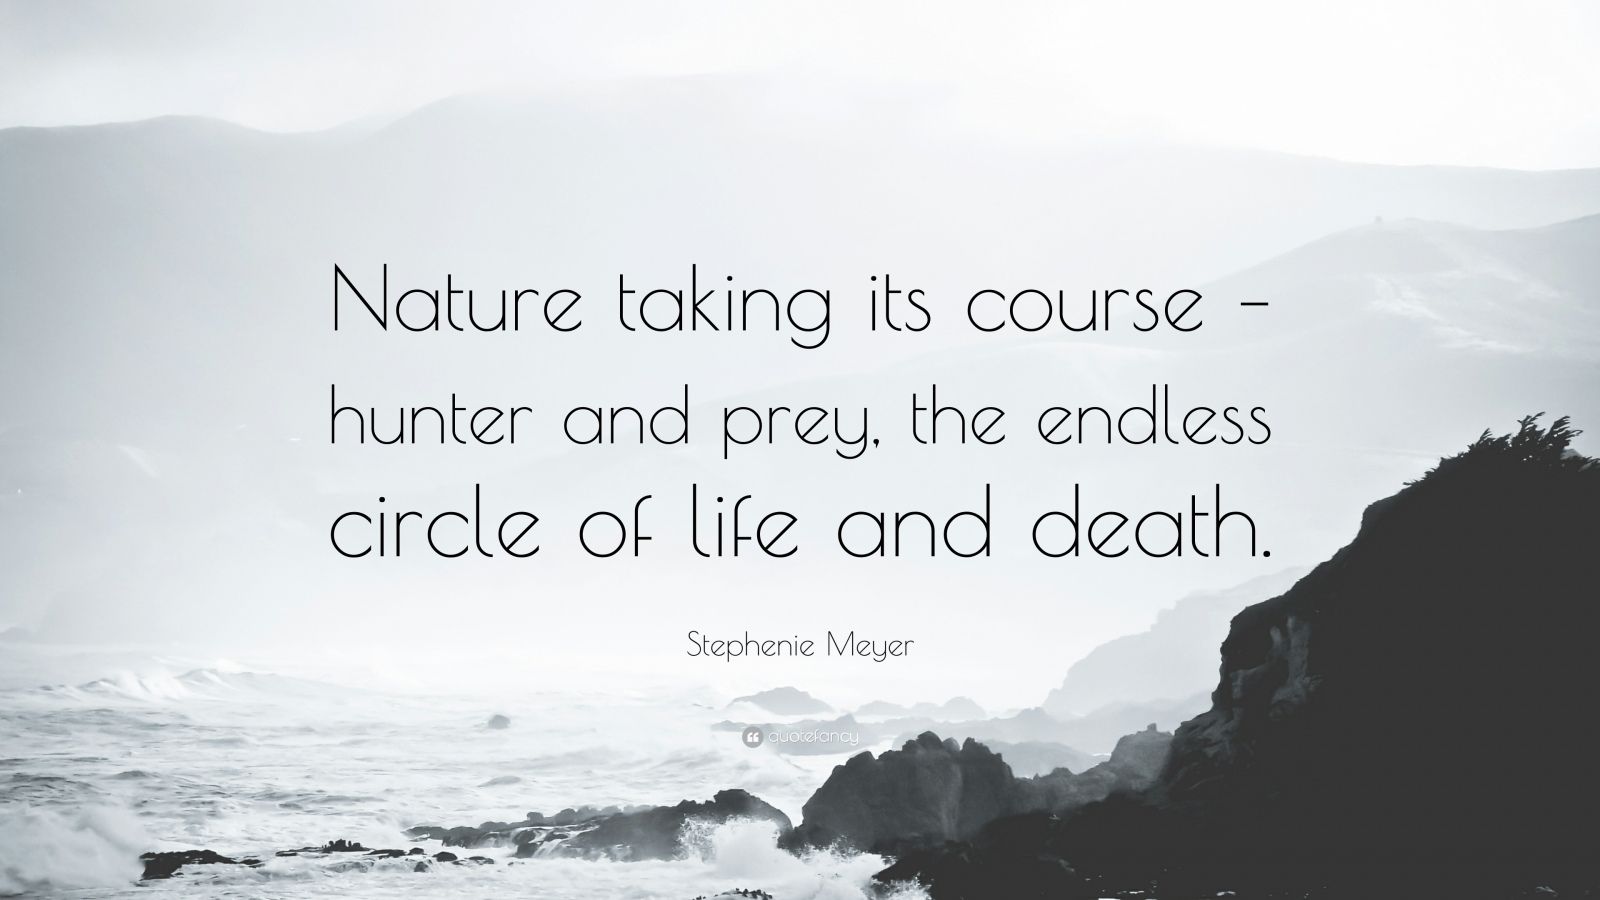 Stephenie Meyer Quote: “Nature taking its course – hunter and prey, the